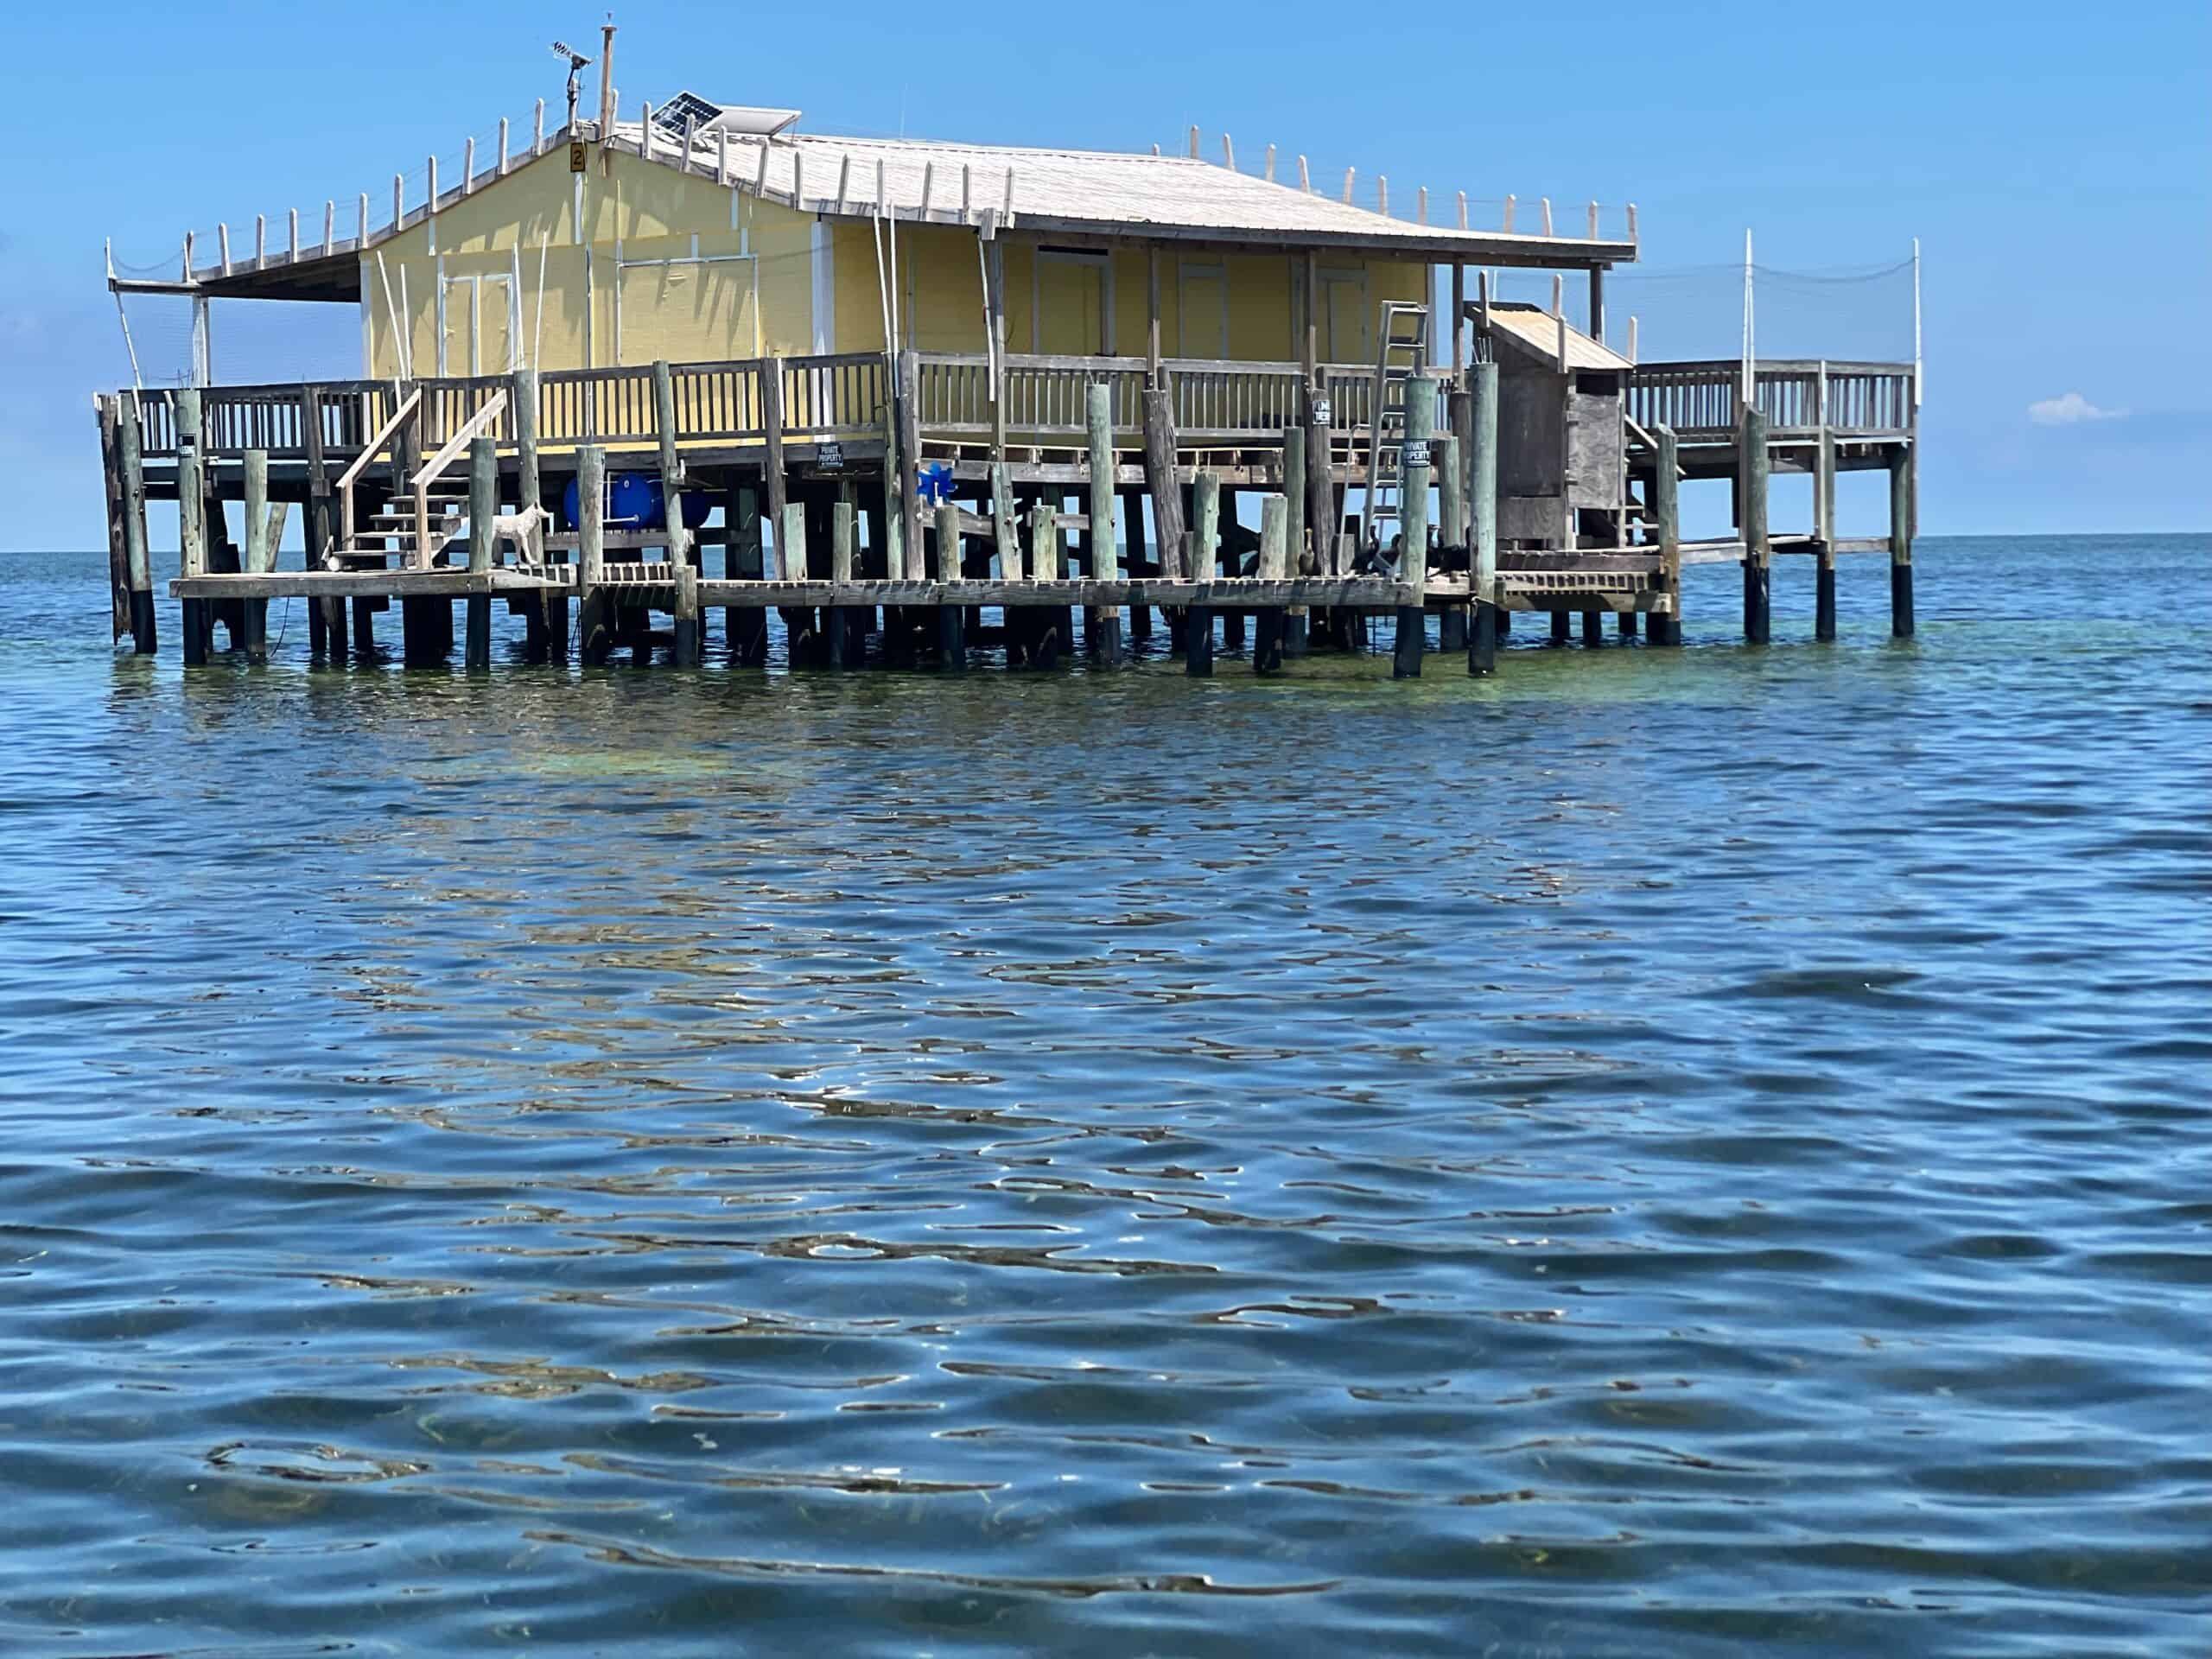 A stilt house in New Port Richey, Gulf of Mexico.